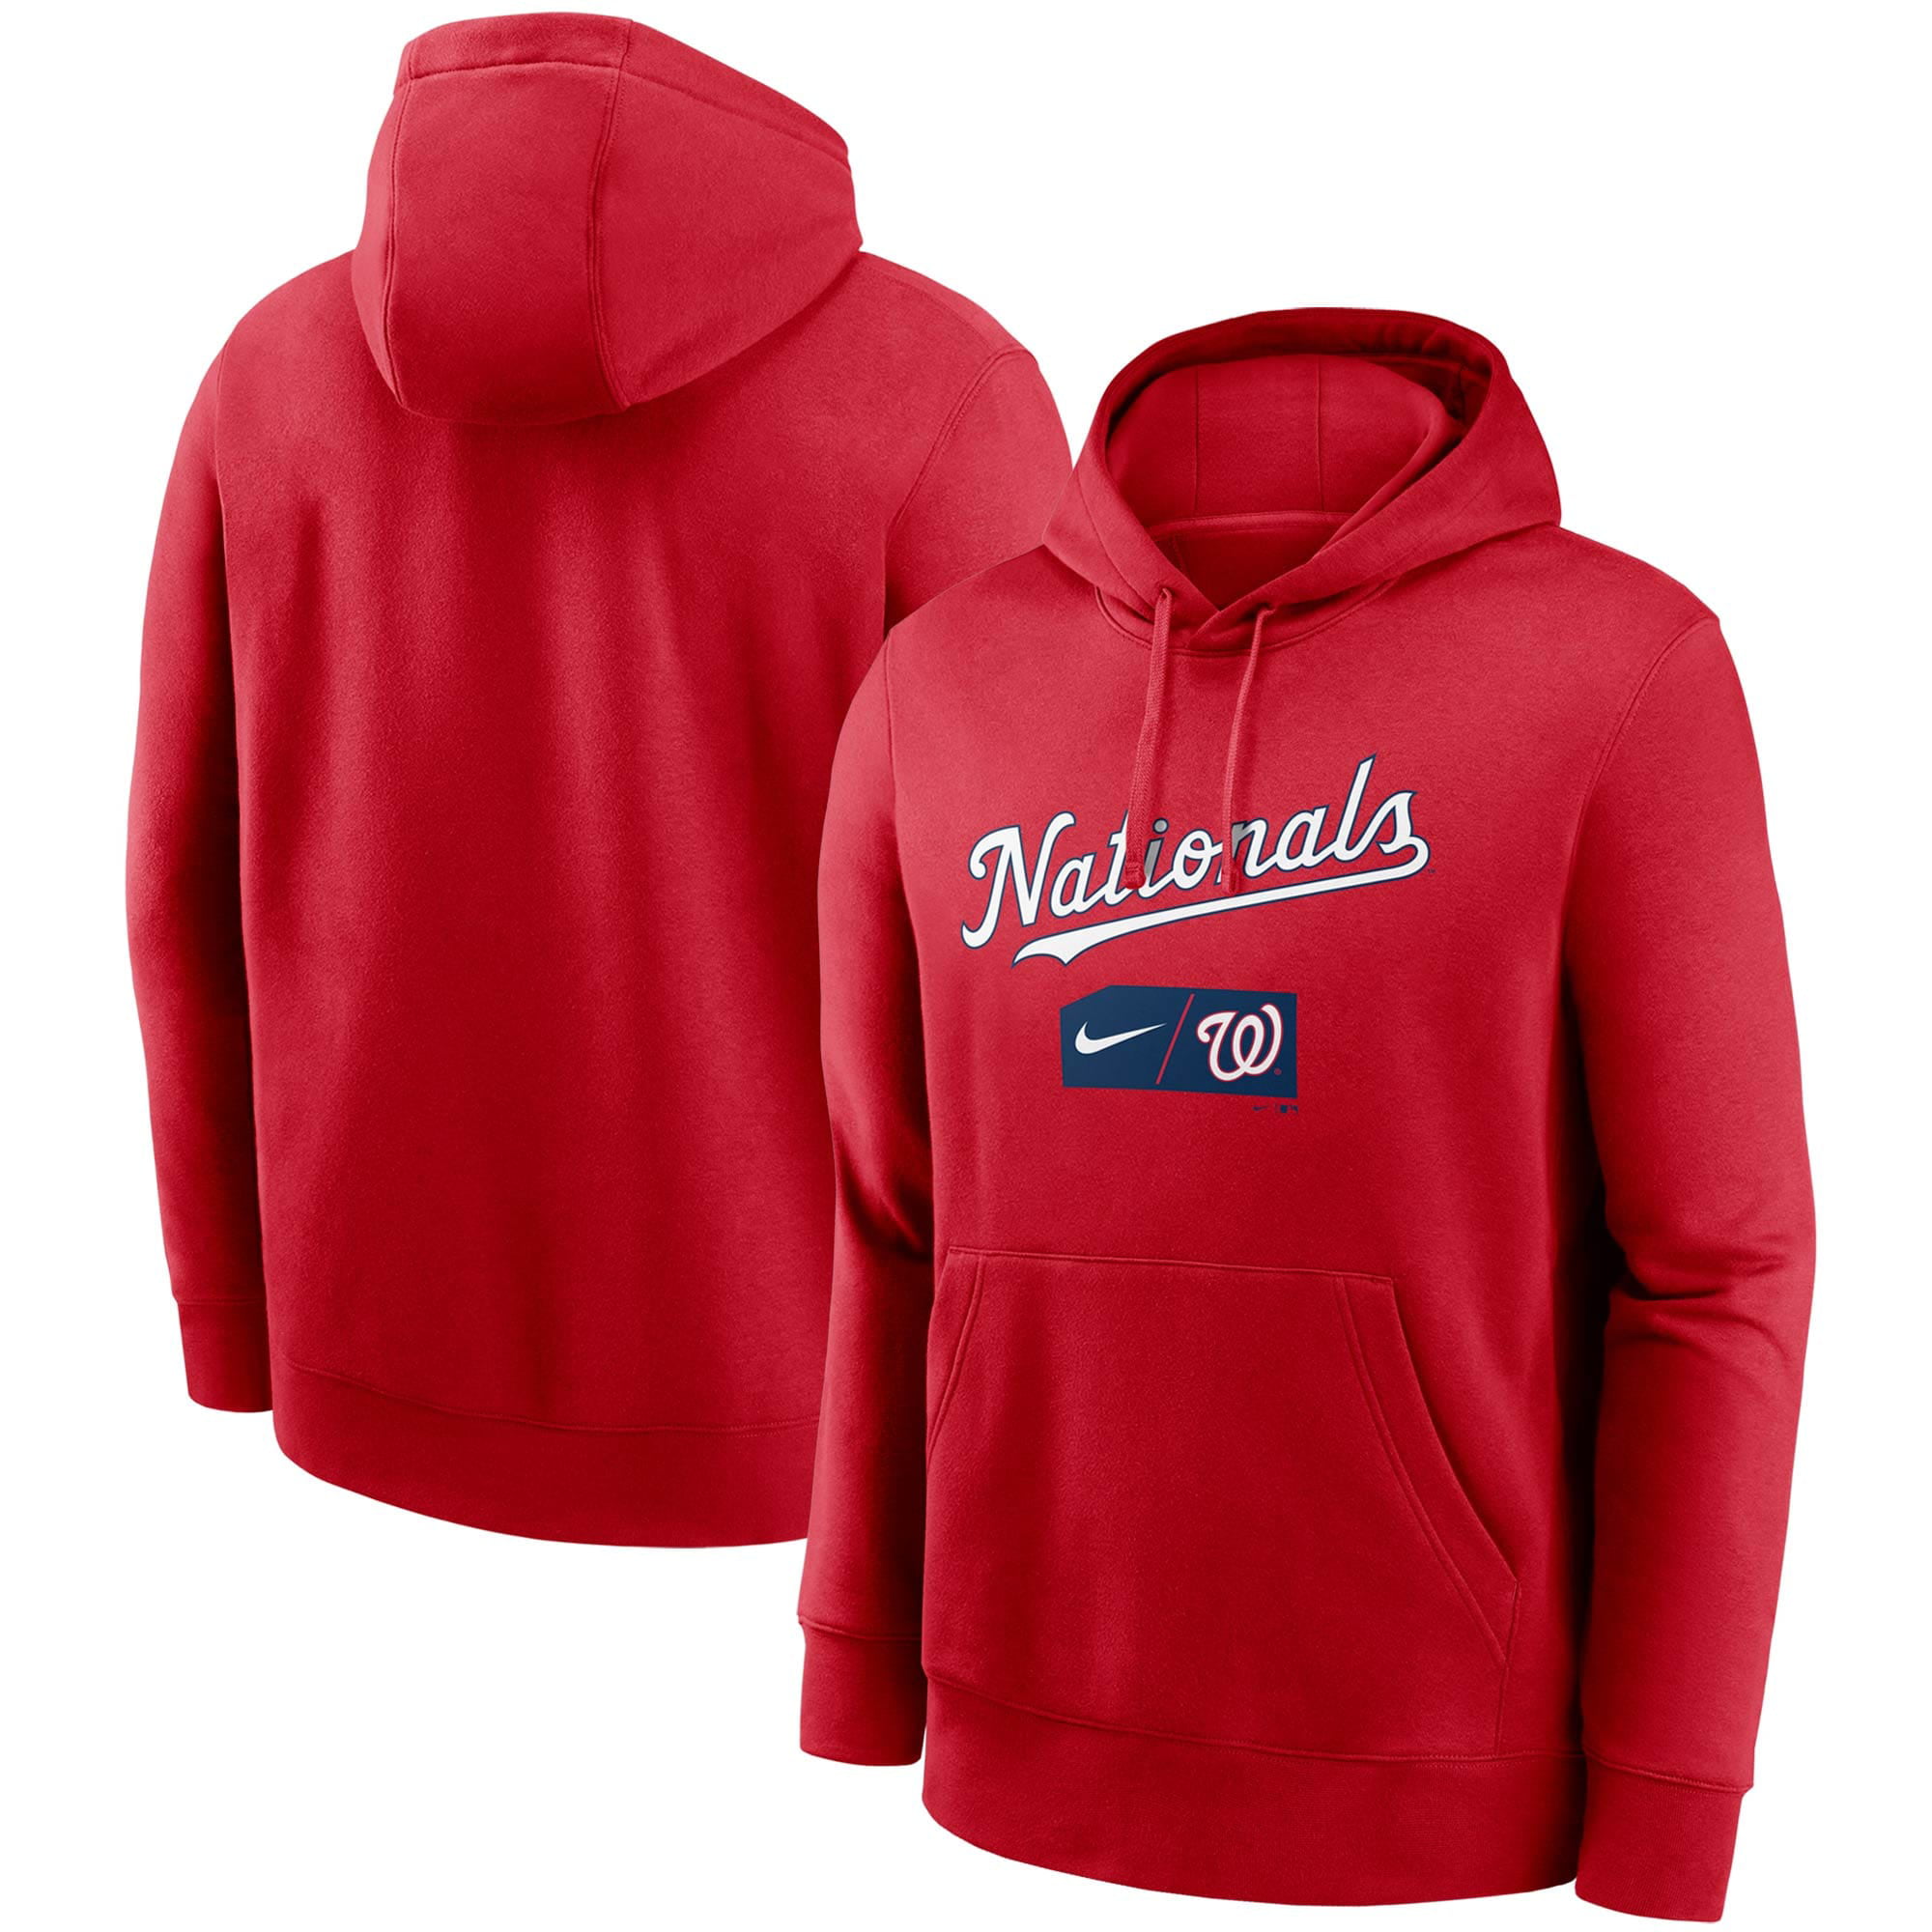 Men's Nike Red Washington Nationals Team Lettering Club Pullover Hoodie ...